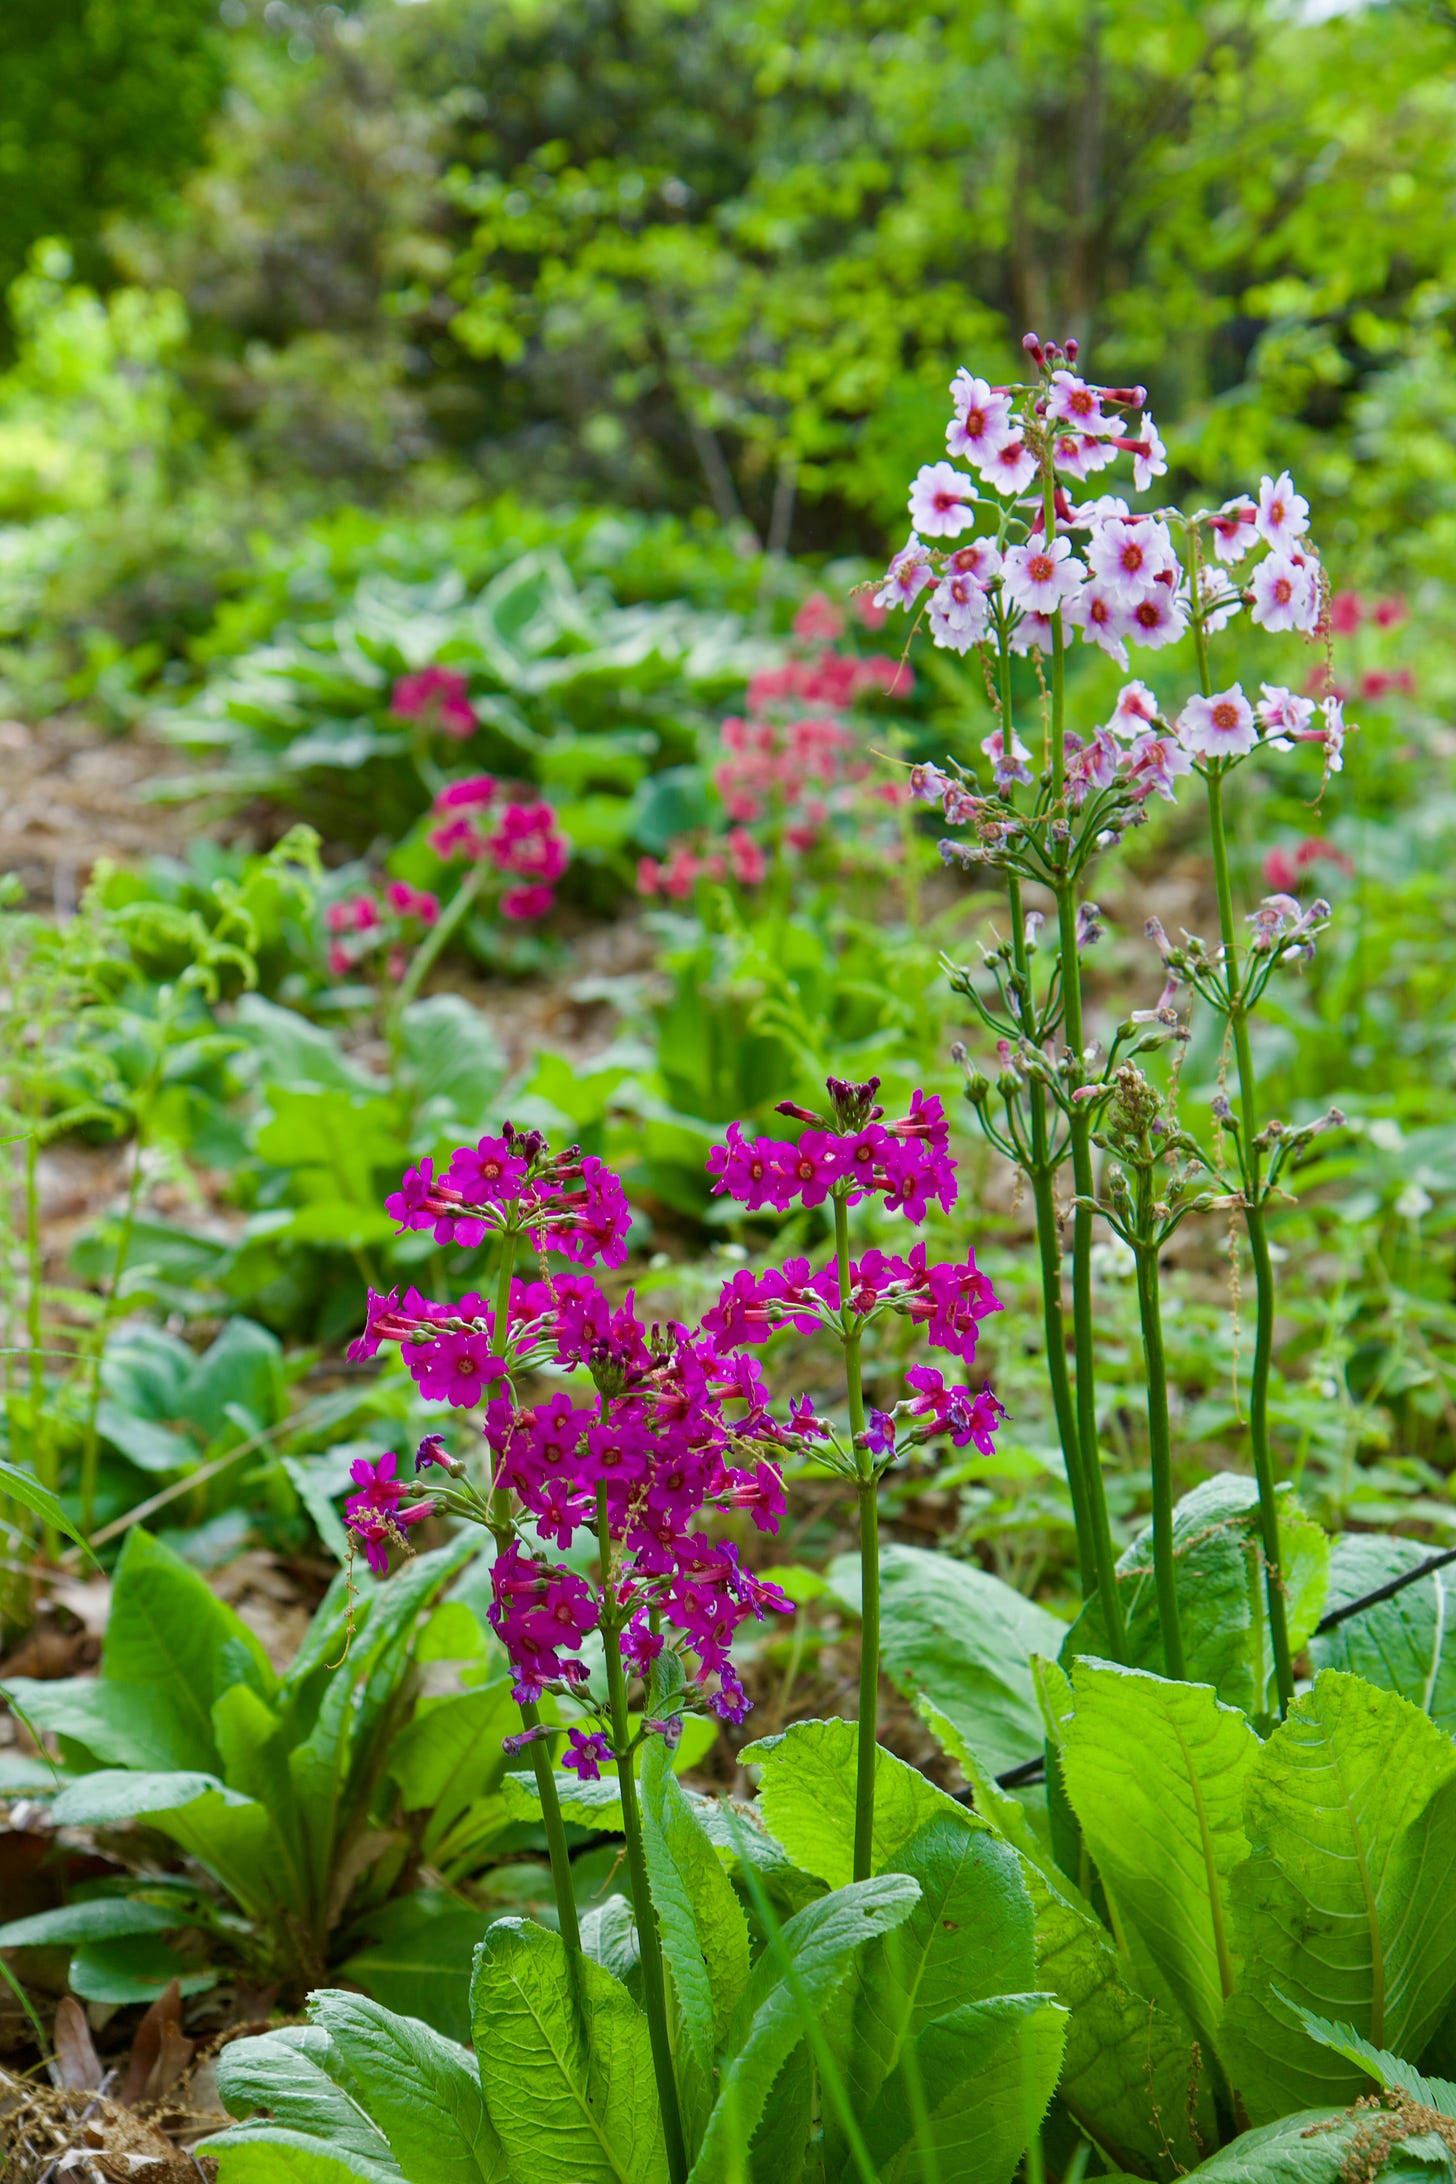 One of the dampest areas in the garden, the Primrose path is full of Candelabra primula. I’ve been working on collecting quite a few colors in the past 6 years and they are reseeding quite nicely in this damp, mucky soil. 